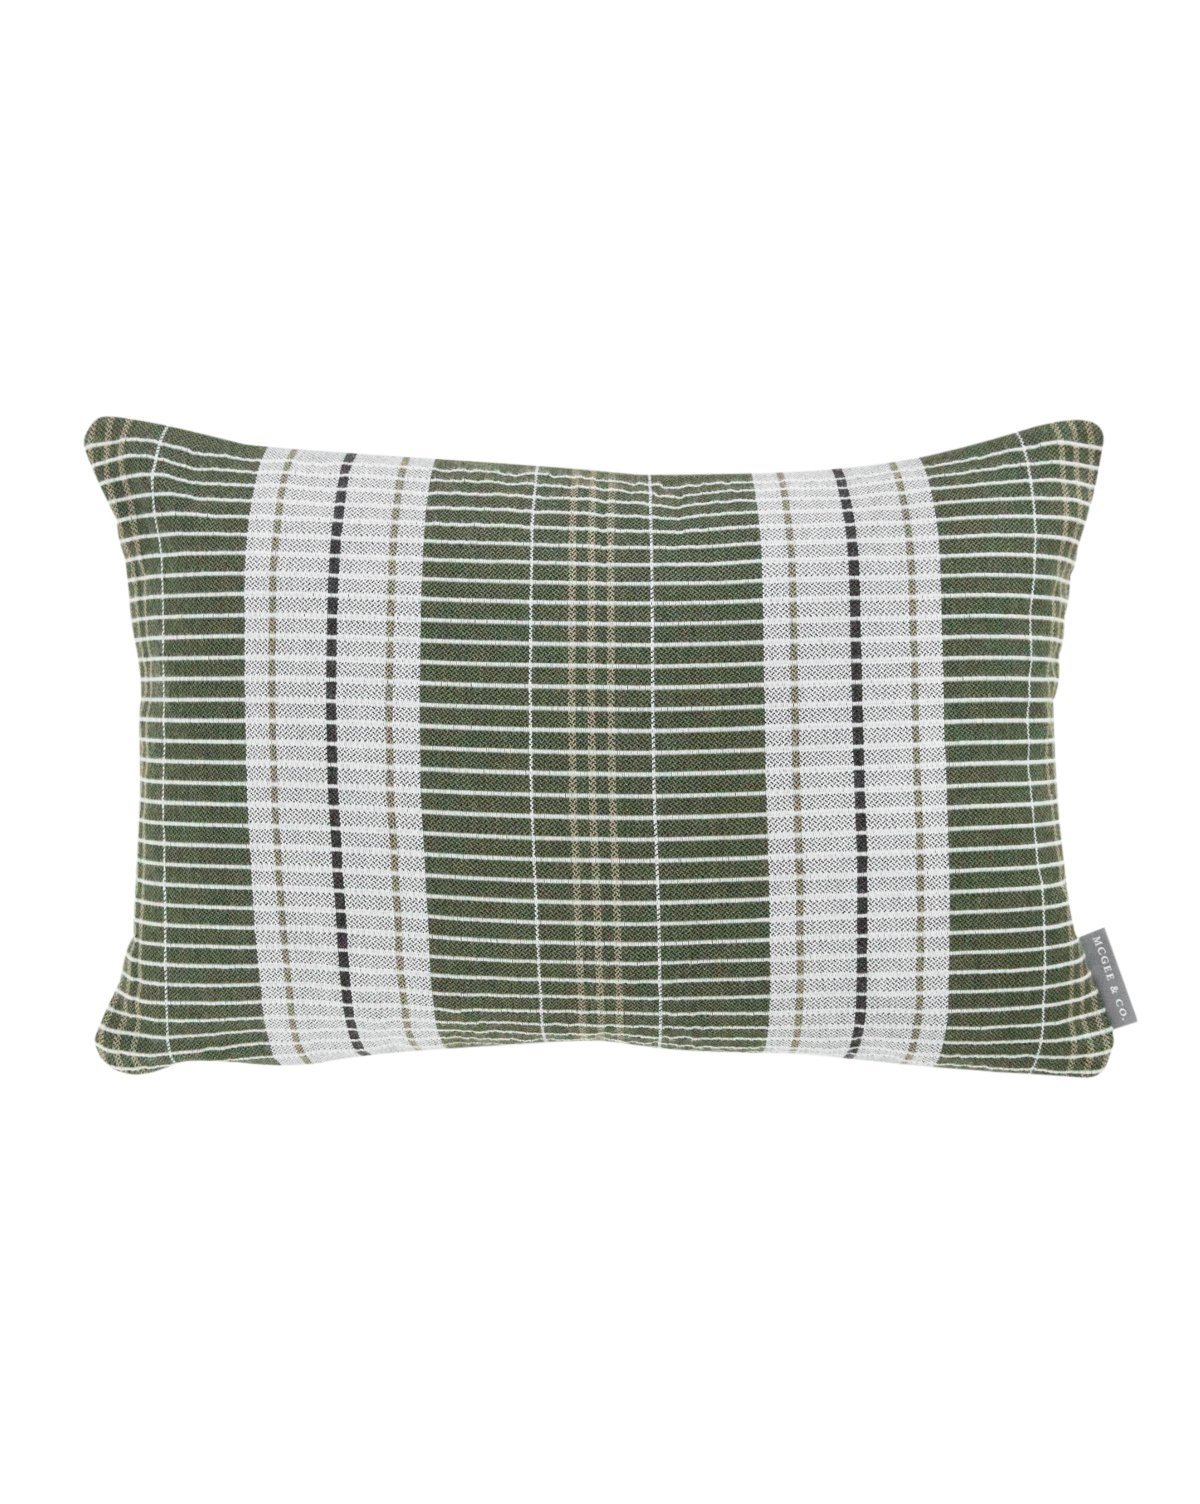 OXFORD WOVEN PLAID PILLOW WITHOUT INSERT, GREEN, 14" x 20" - Image 0